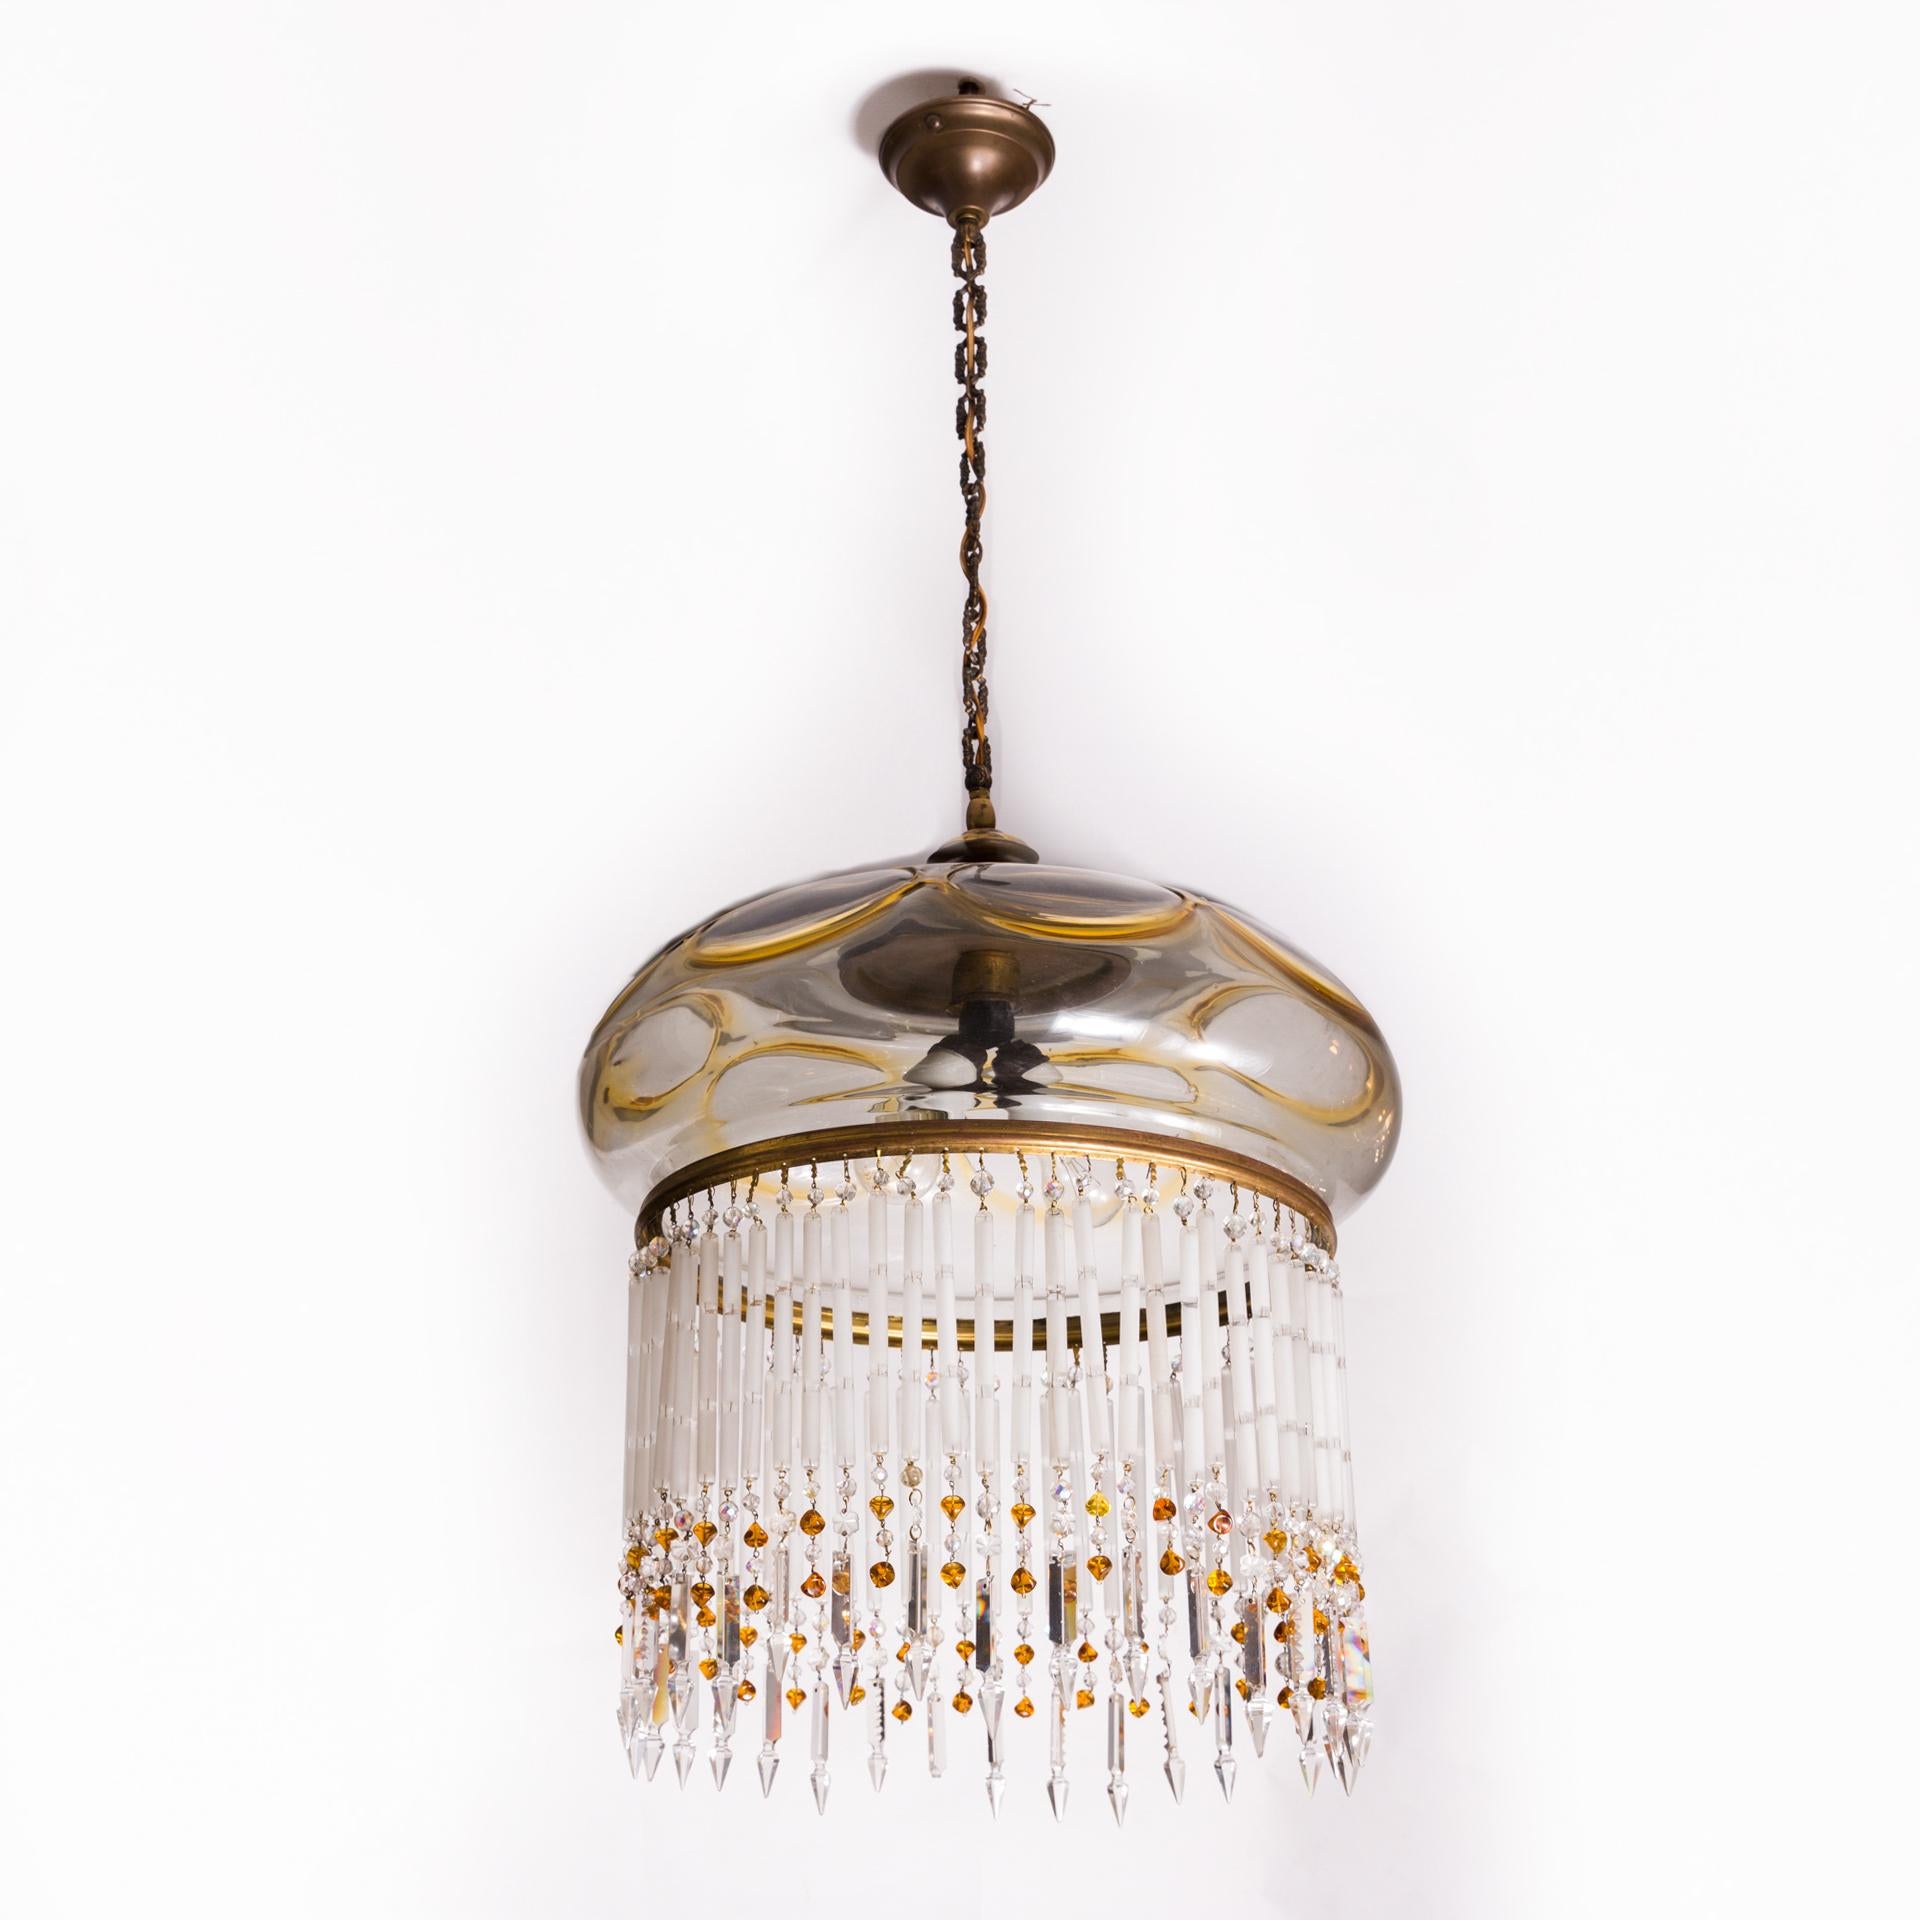 A beautiful, large chandelier with an Art Nouveau character, made circa 1900. It combines the tradition of using light prisms, together with a unique form.

The upper shade of anthracite colored smoke glass, its decoration is made of lens glass